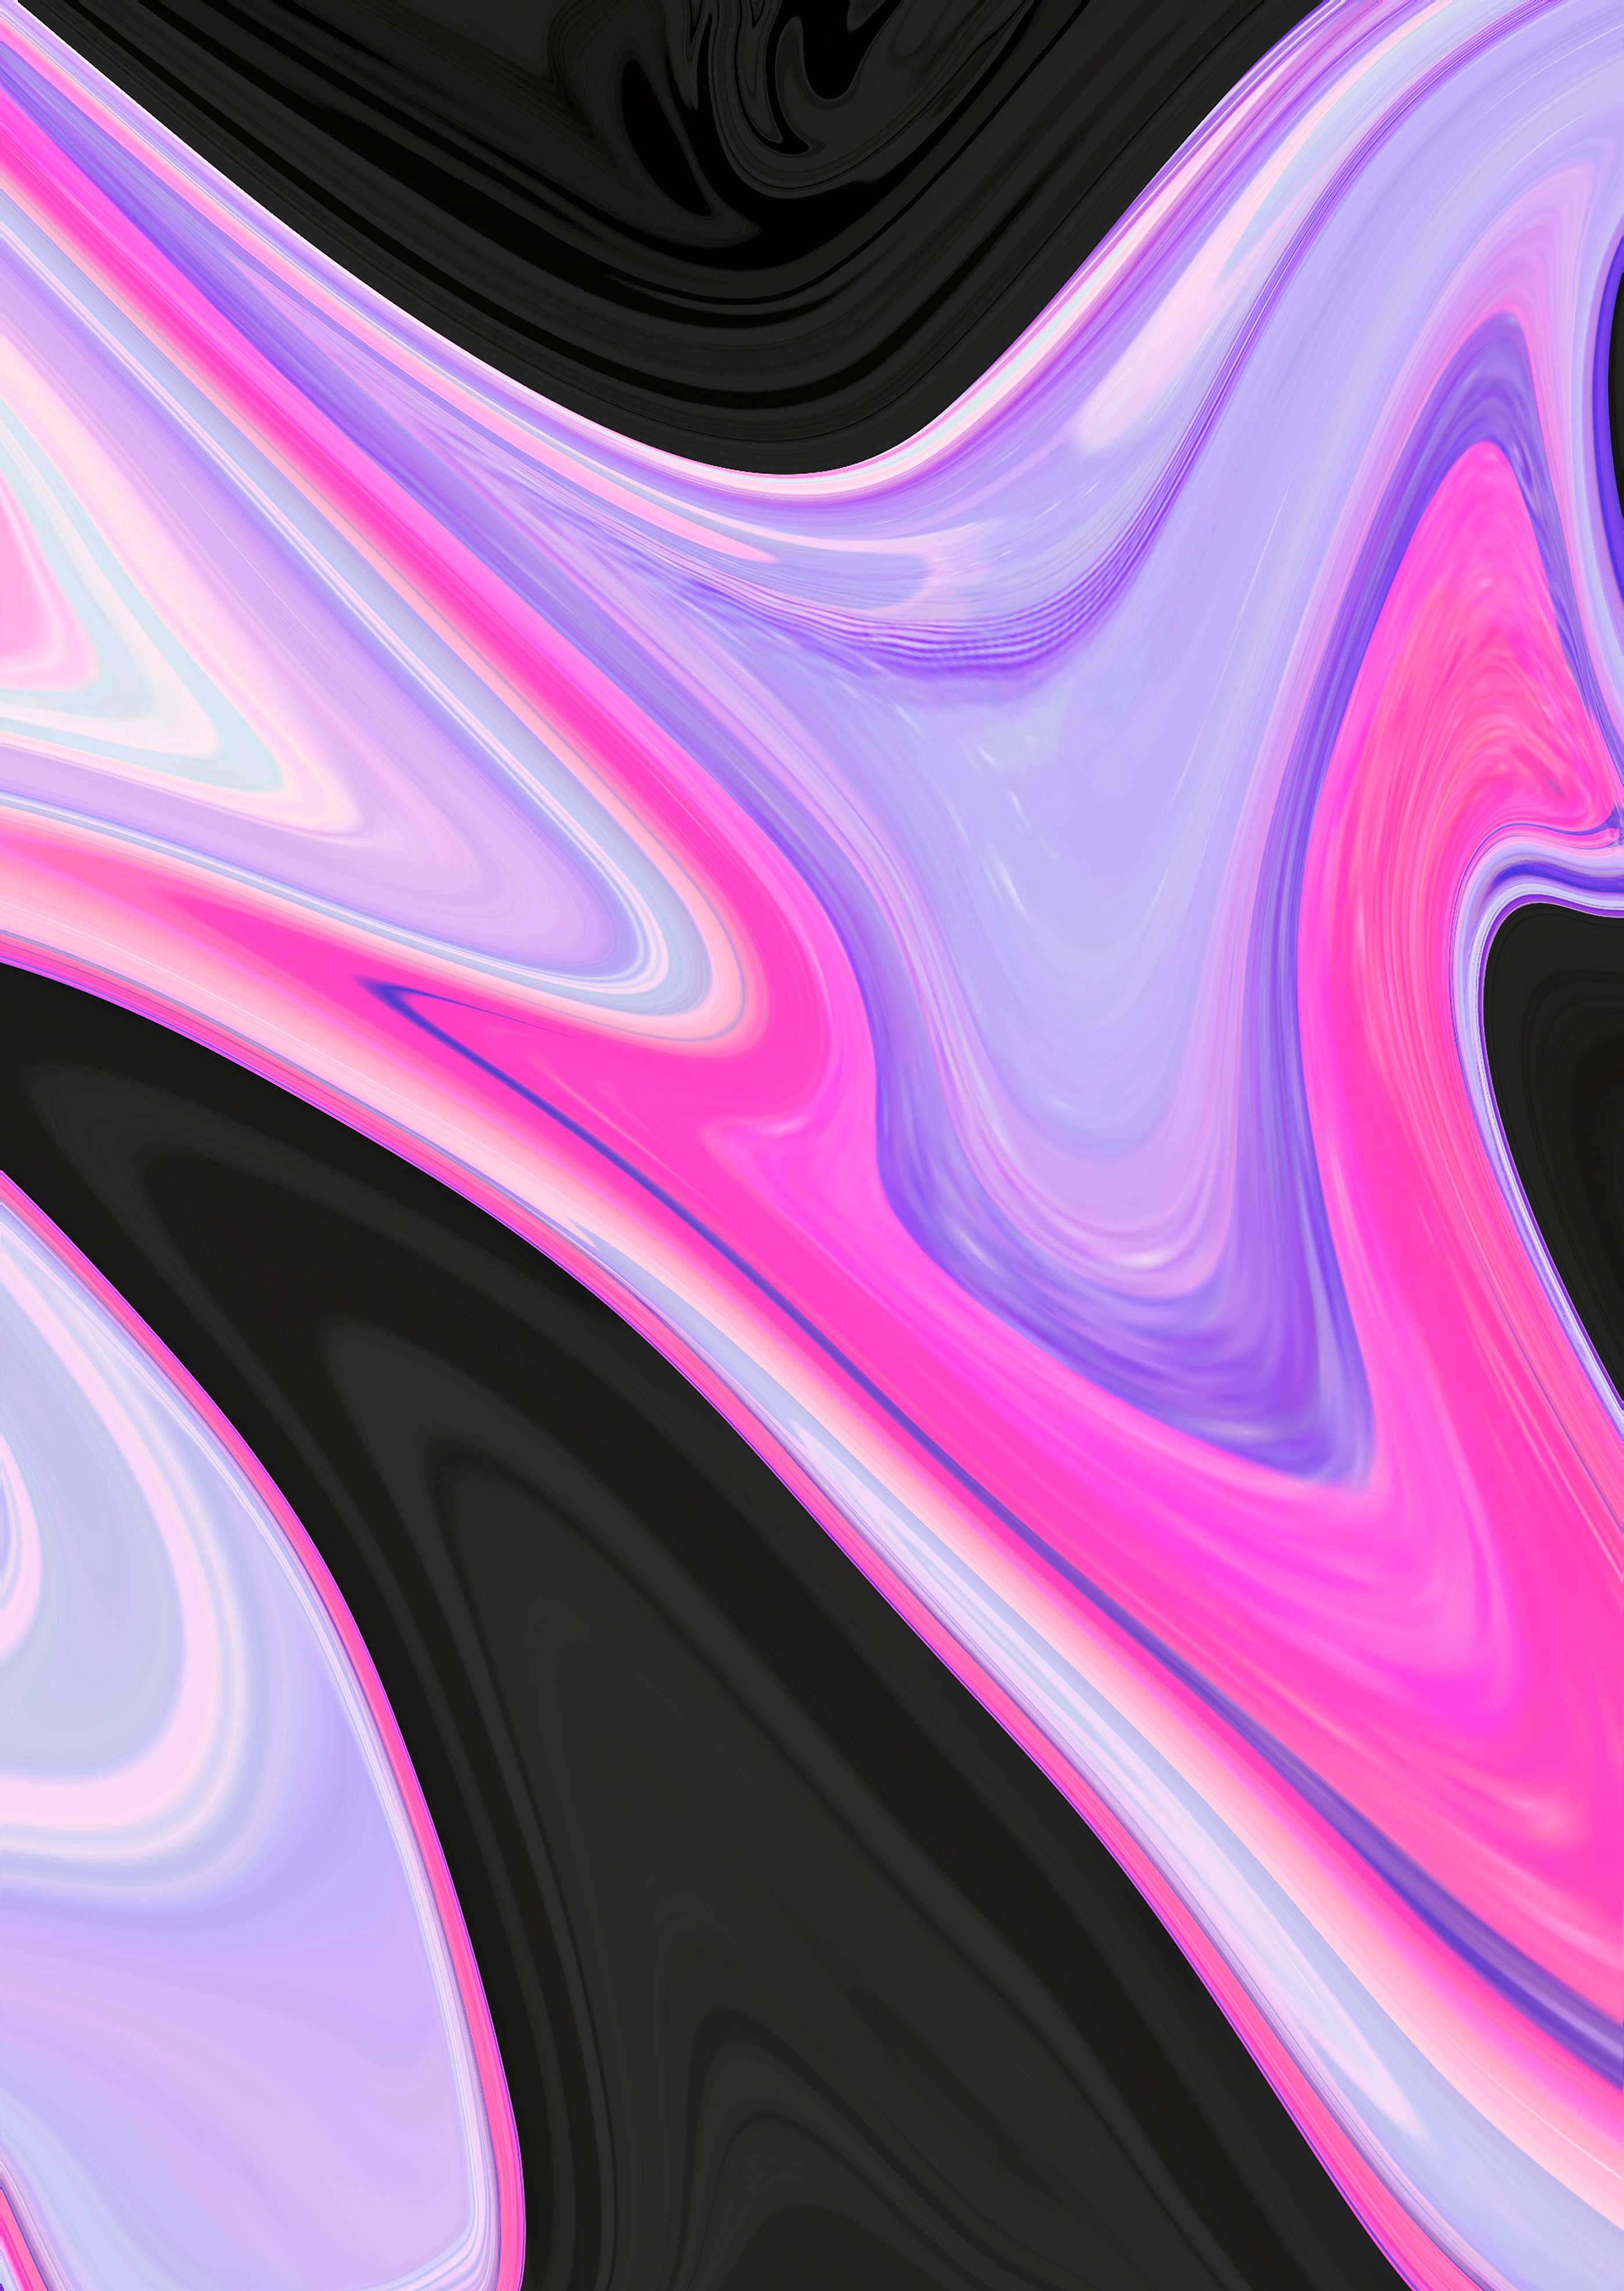 wavy, pink, abstract, black, lines, lilac, paint Aesthetic wallpaper